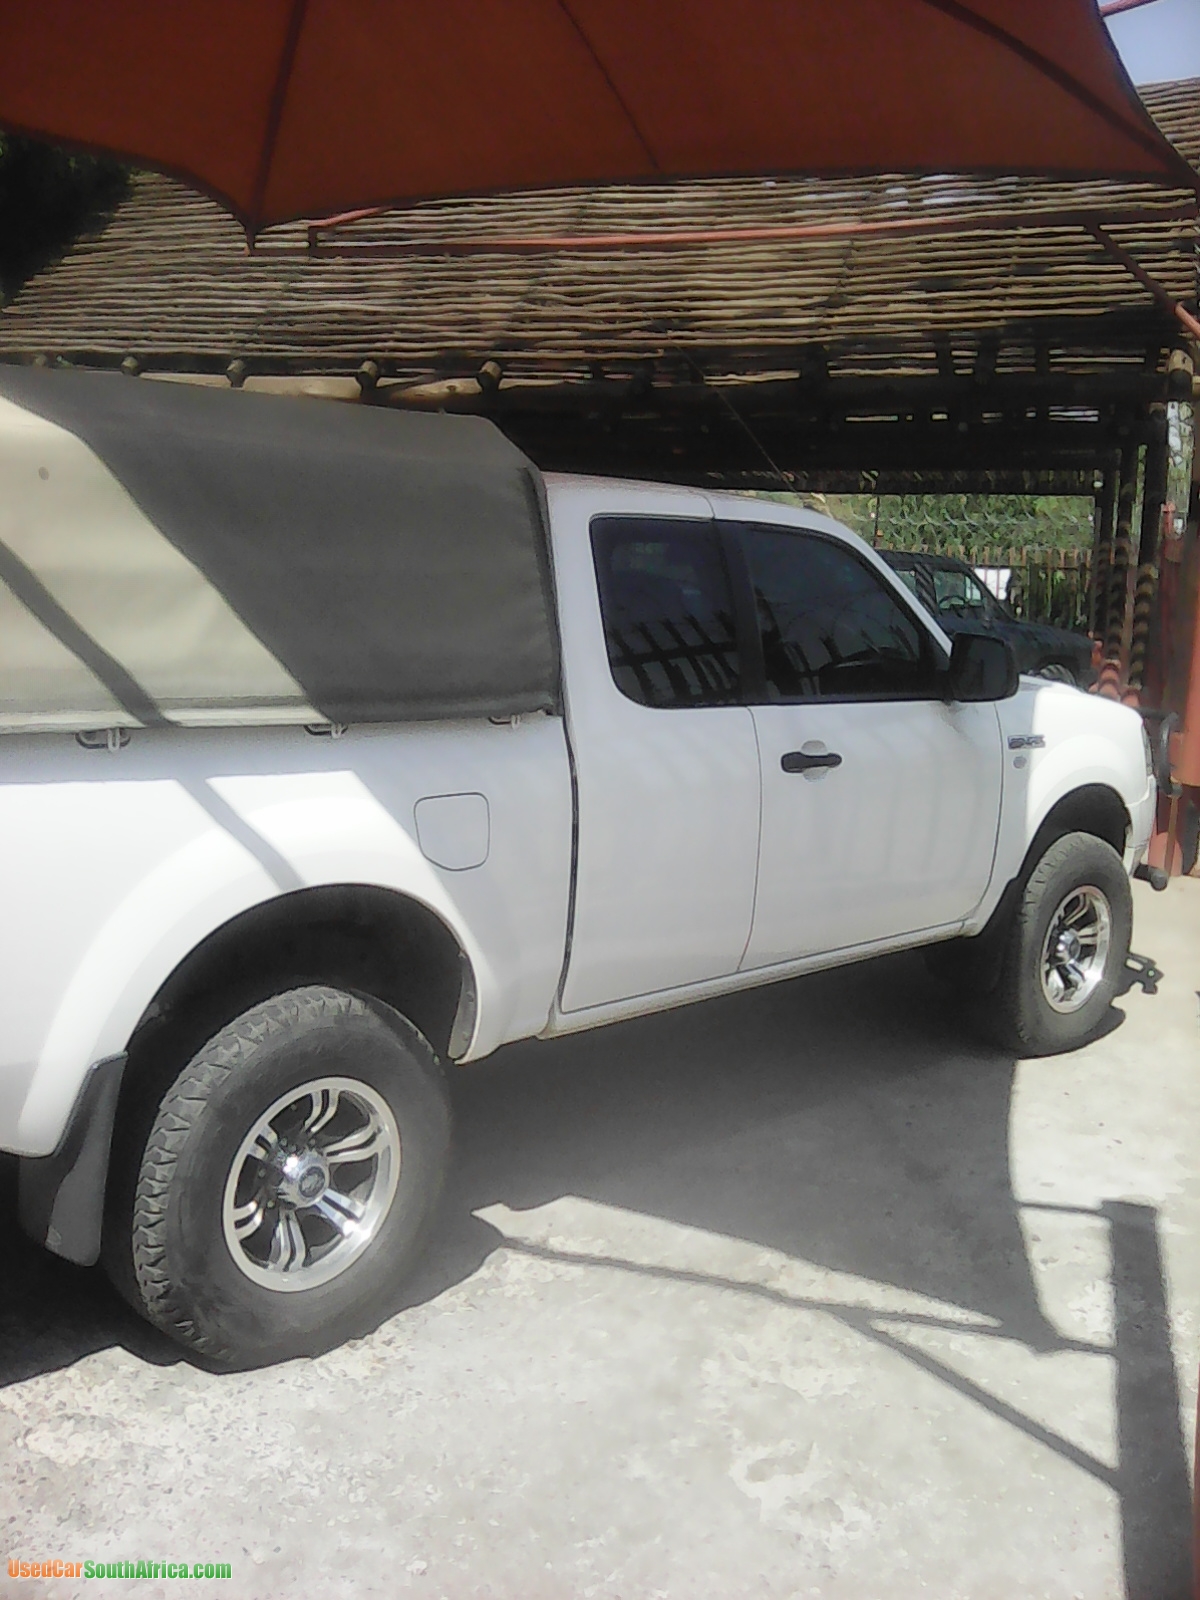 2008 Ford Ranger used car for sale in Brits North West South Africa - OnlyCars.co.za